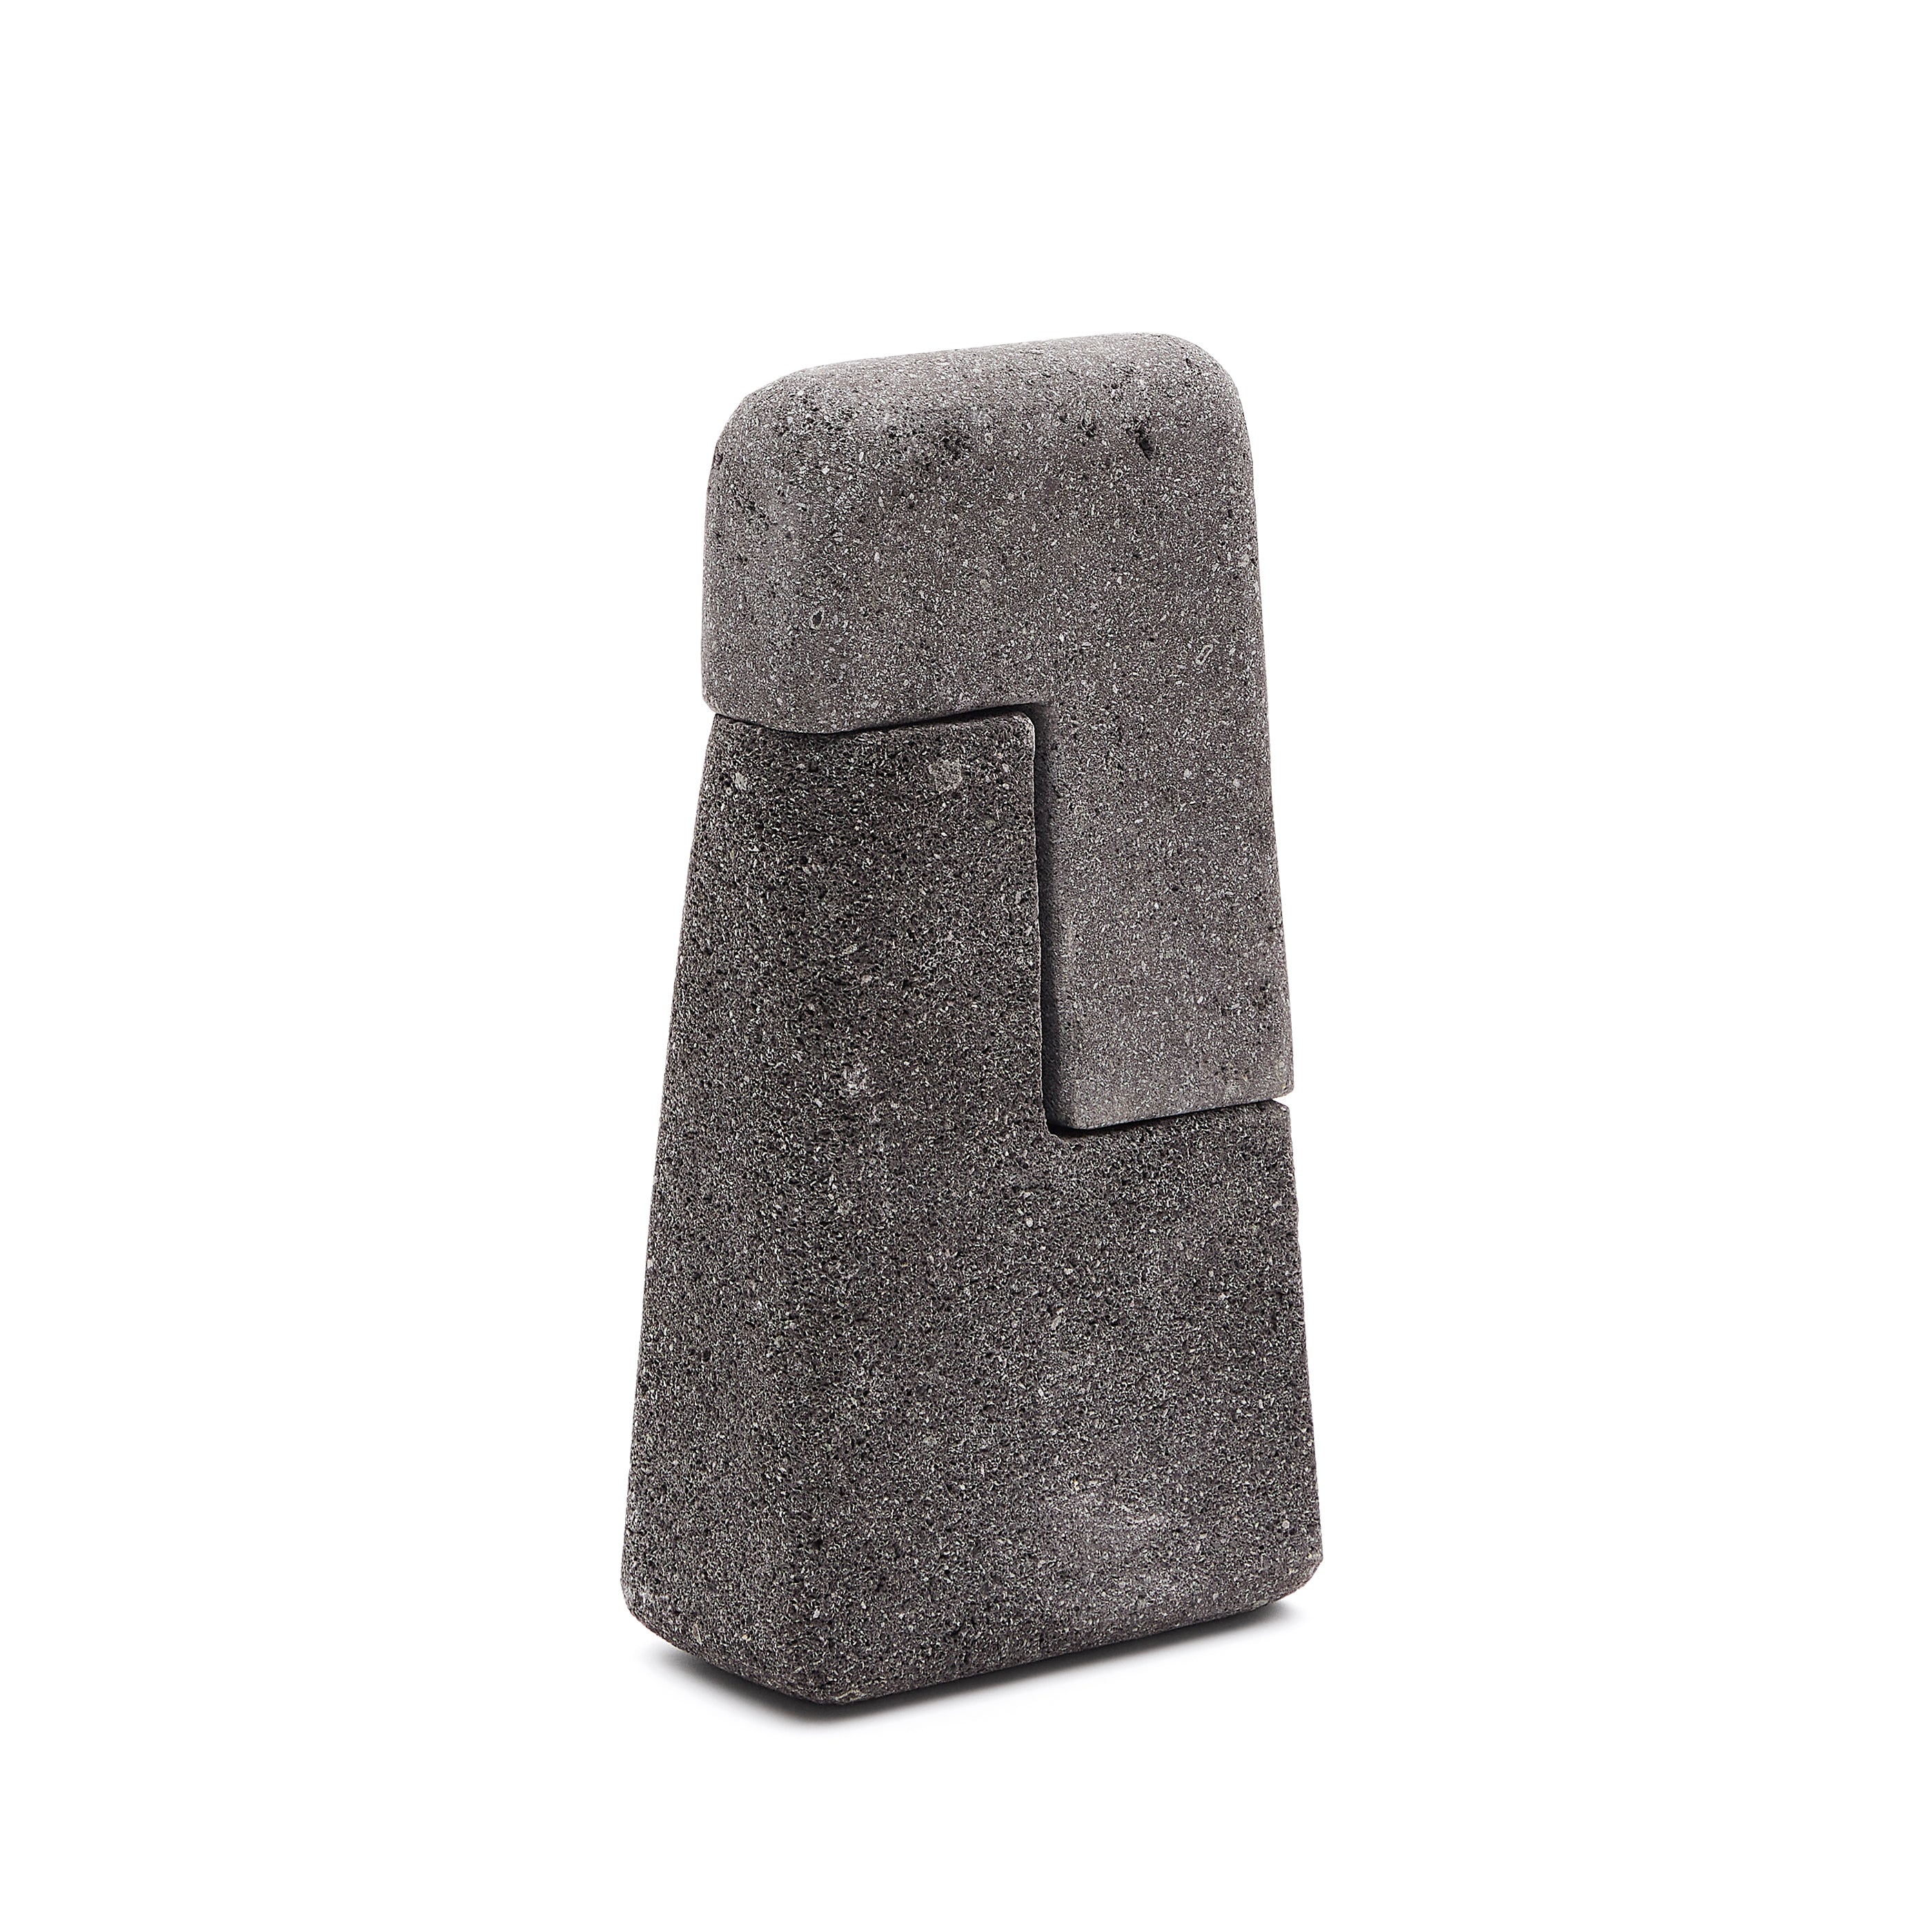 Sipa stone statue with natural finish 30 cm